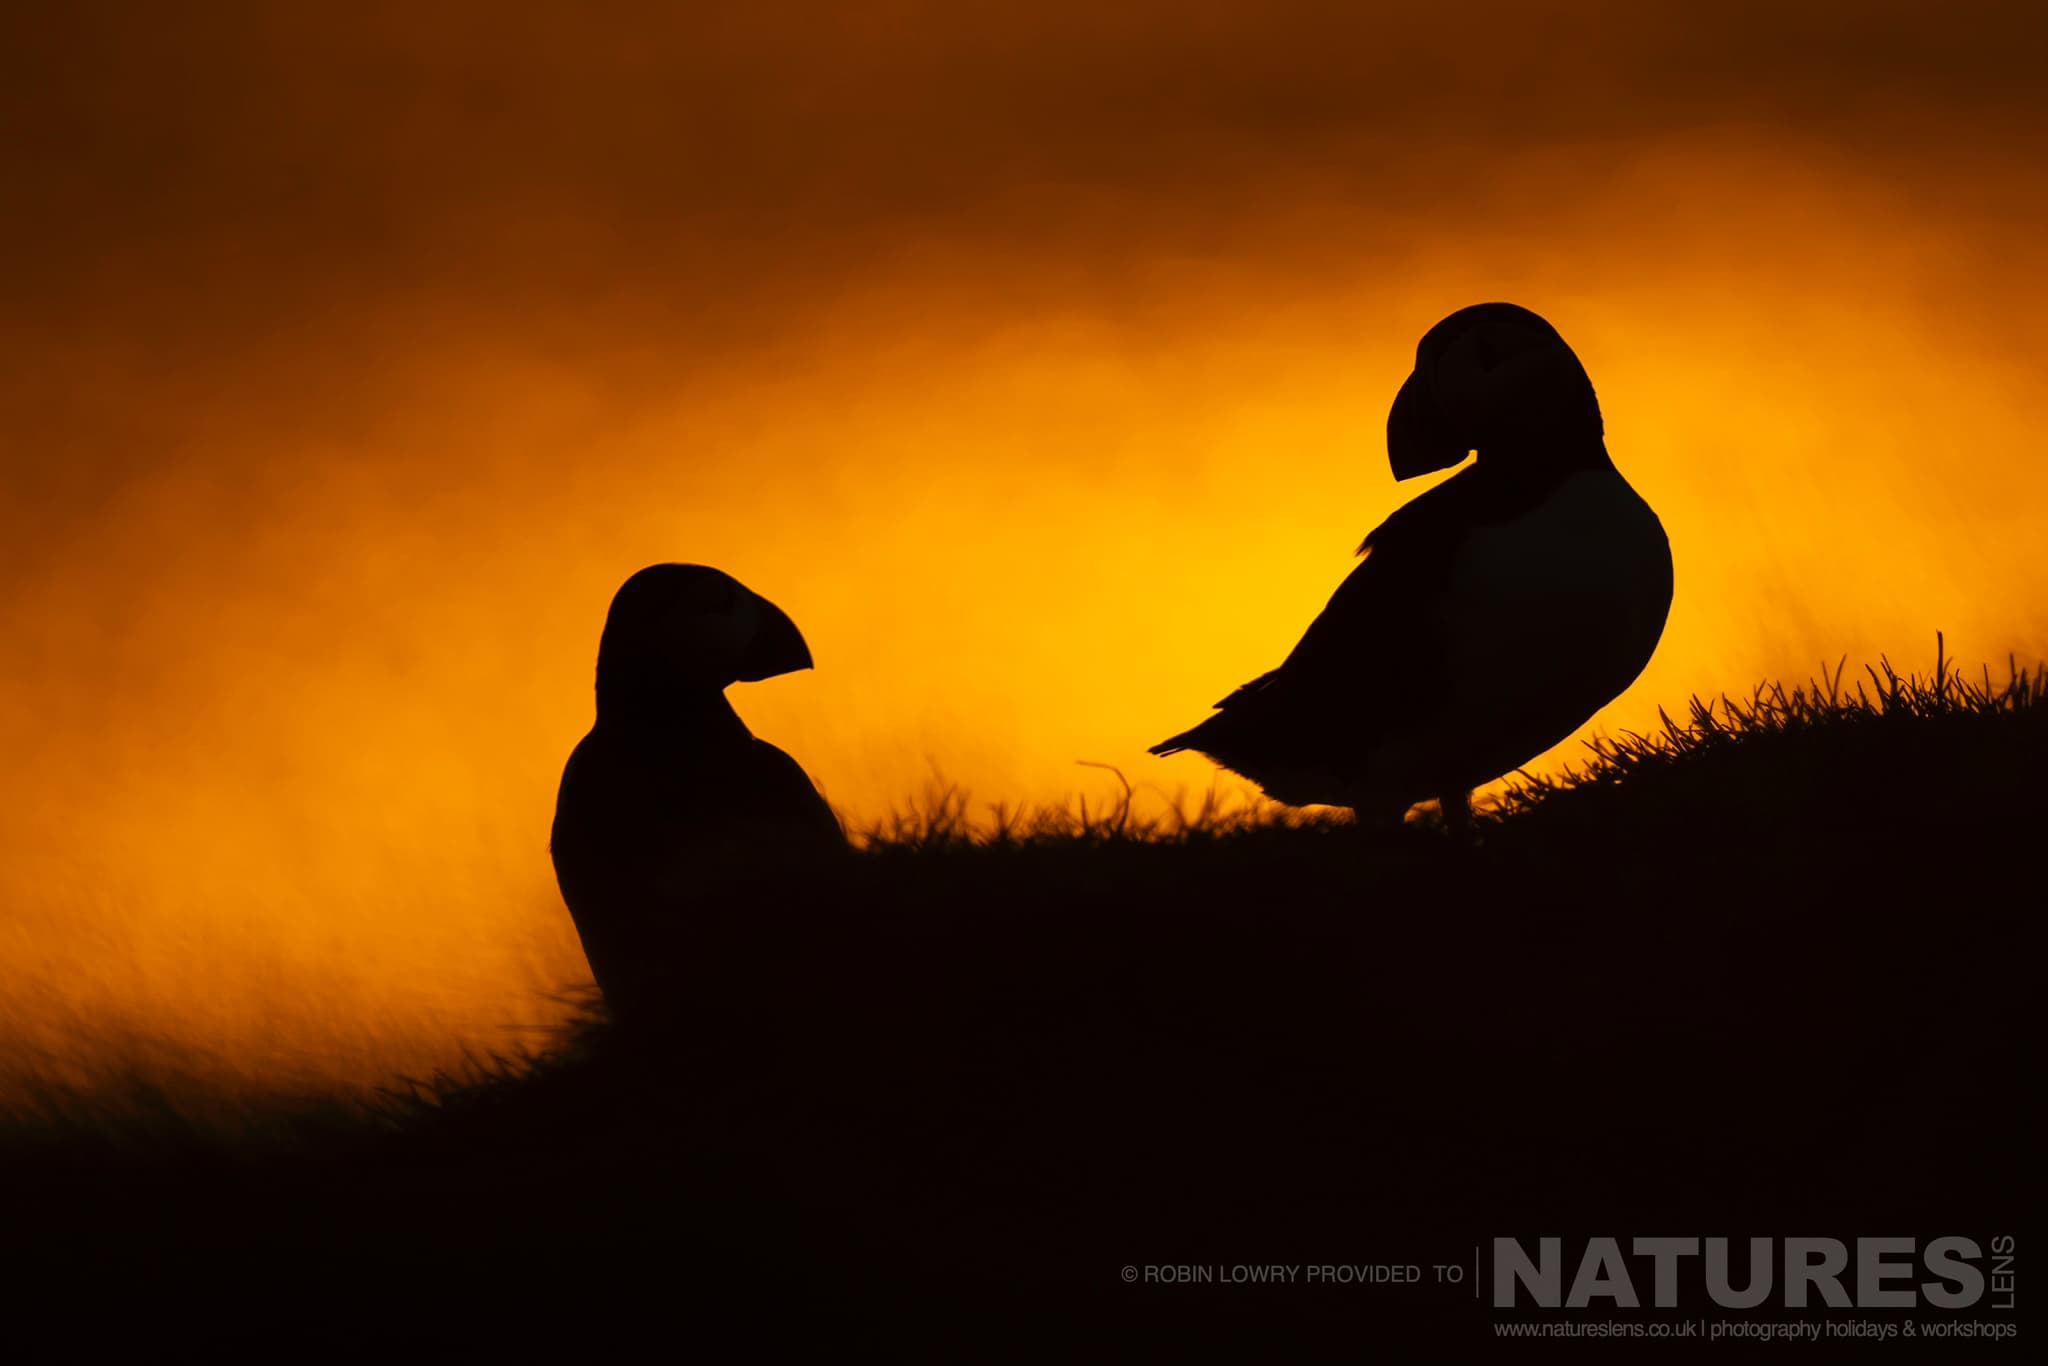 A Duo Of Silhouetted Atlantic Puffins, Photographed In Their Natural Habitat On Grímsey Island, Iceland